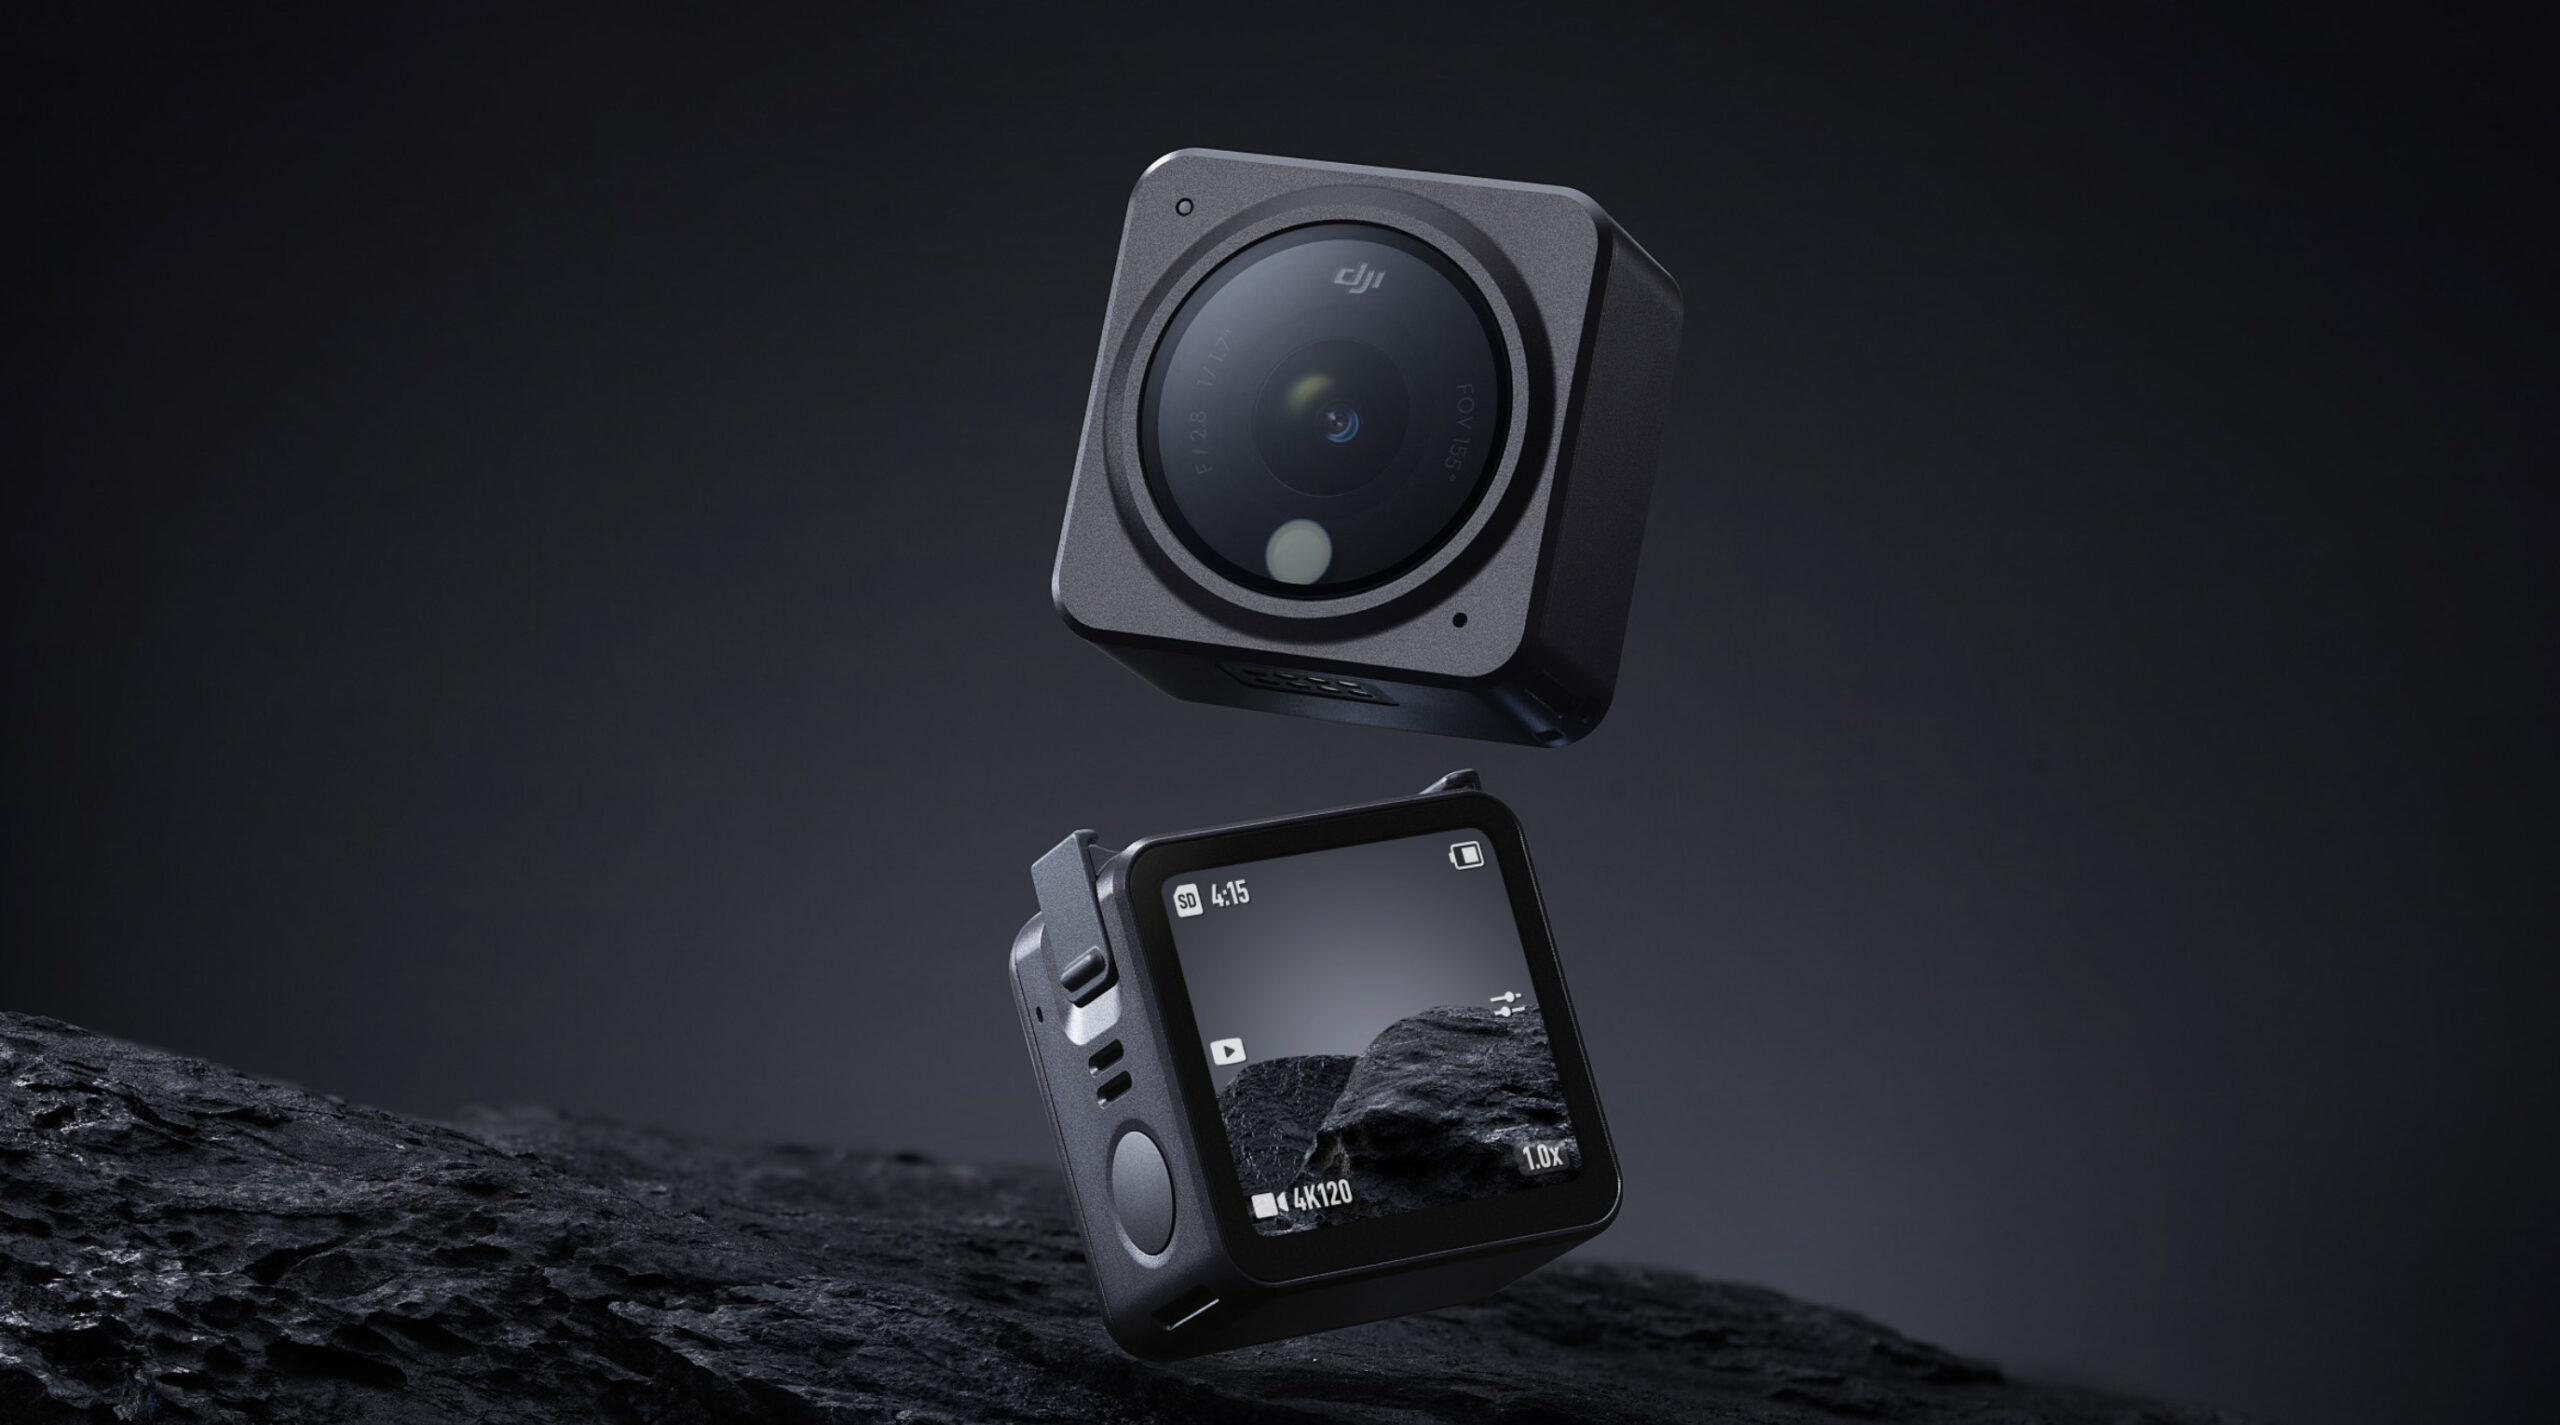 The DJI Action 2 may be the most modular 4K/120p capable action camera yet